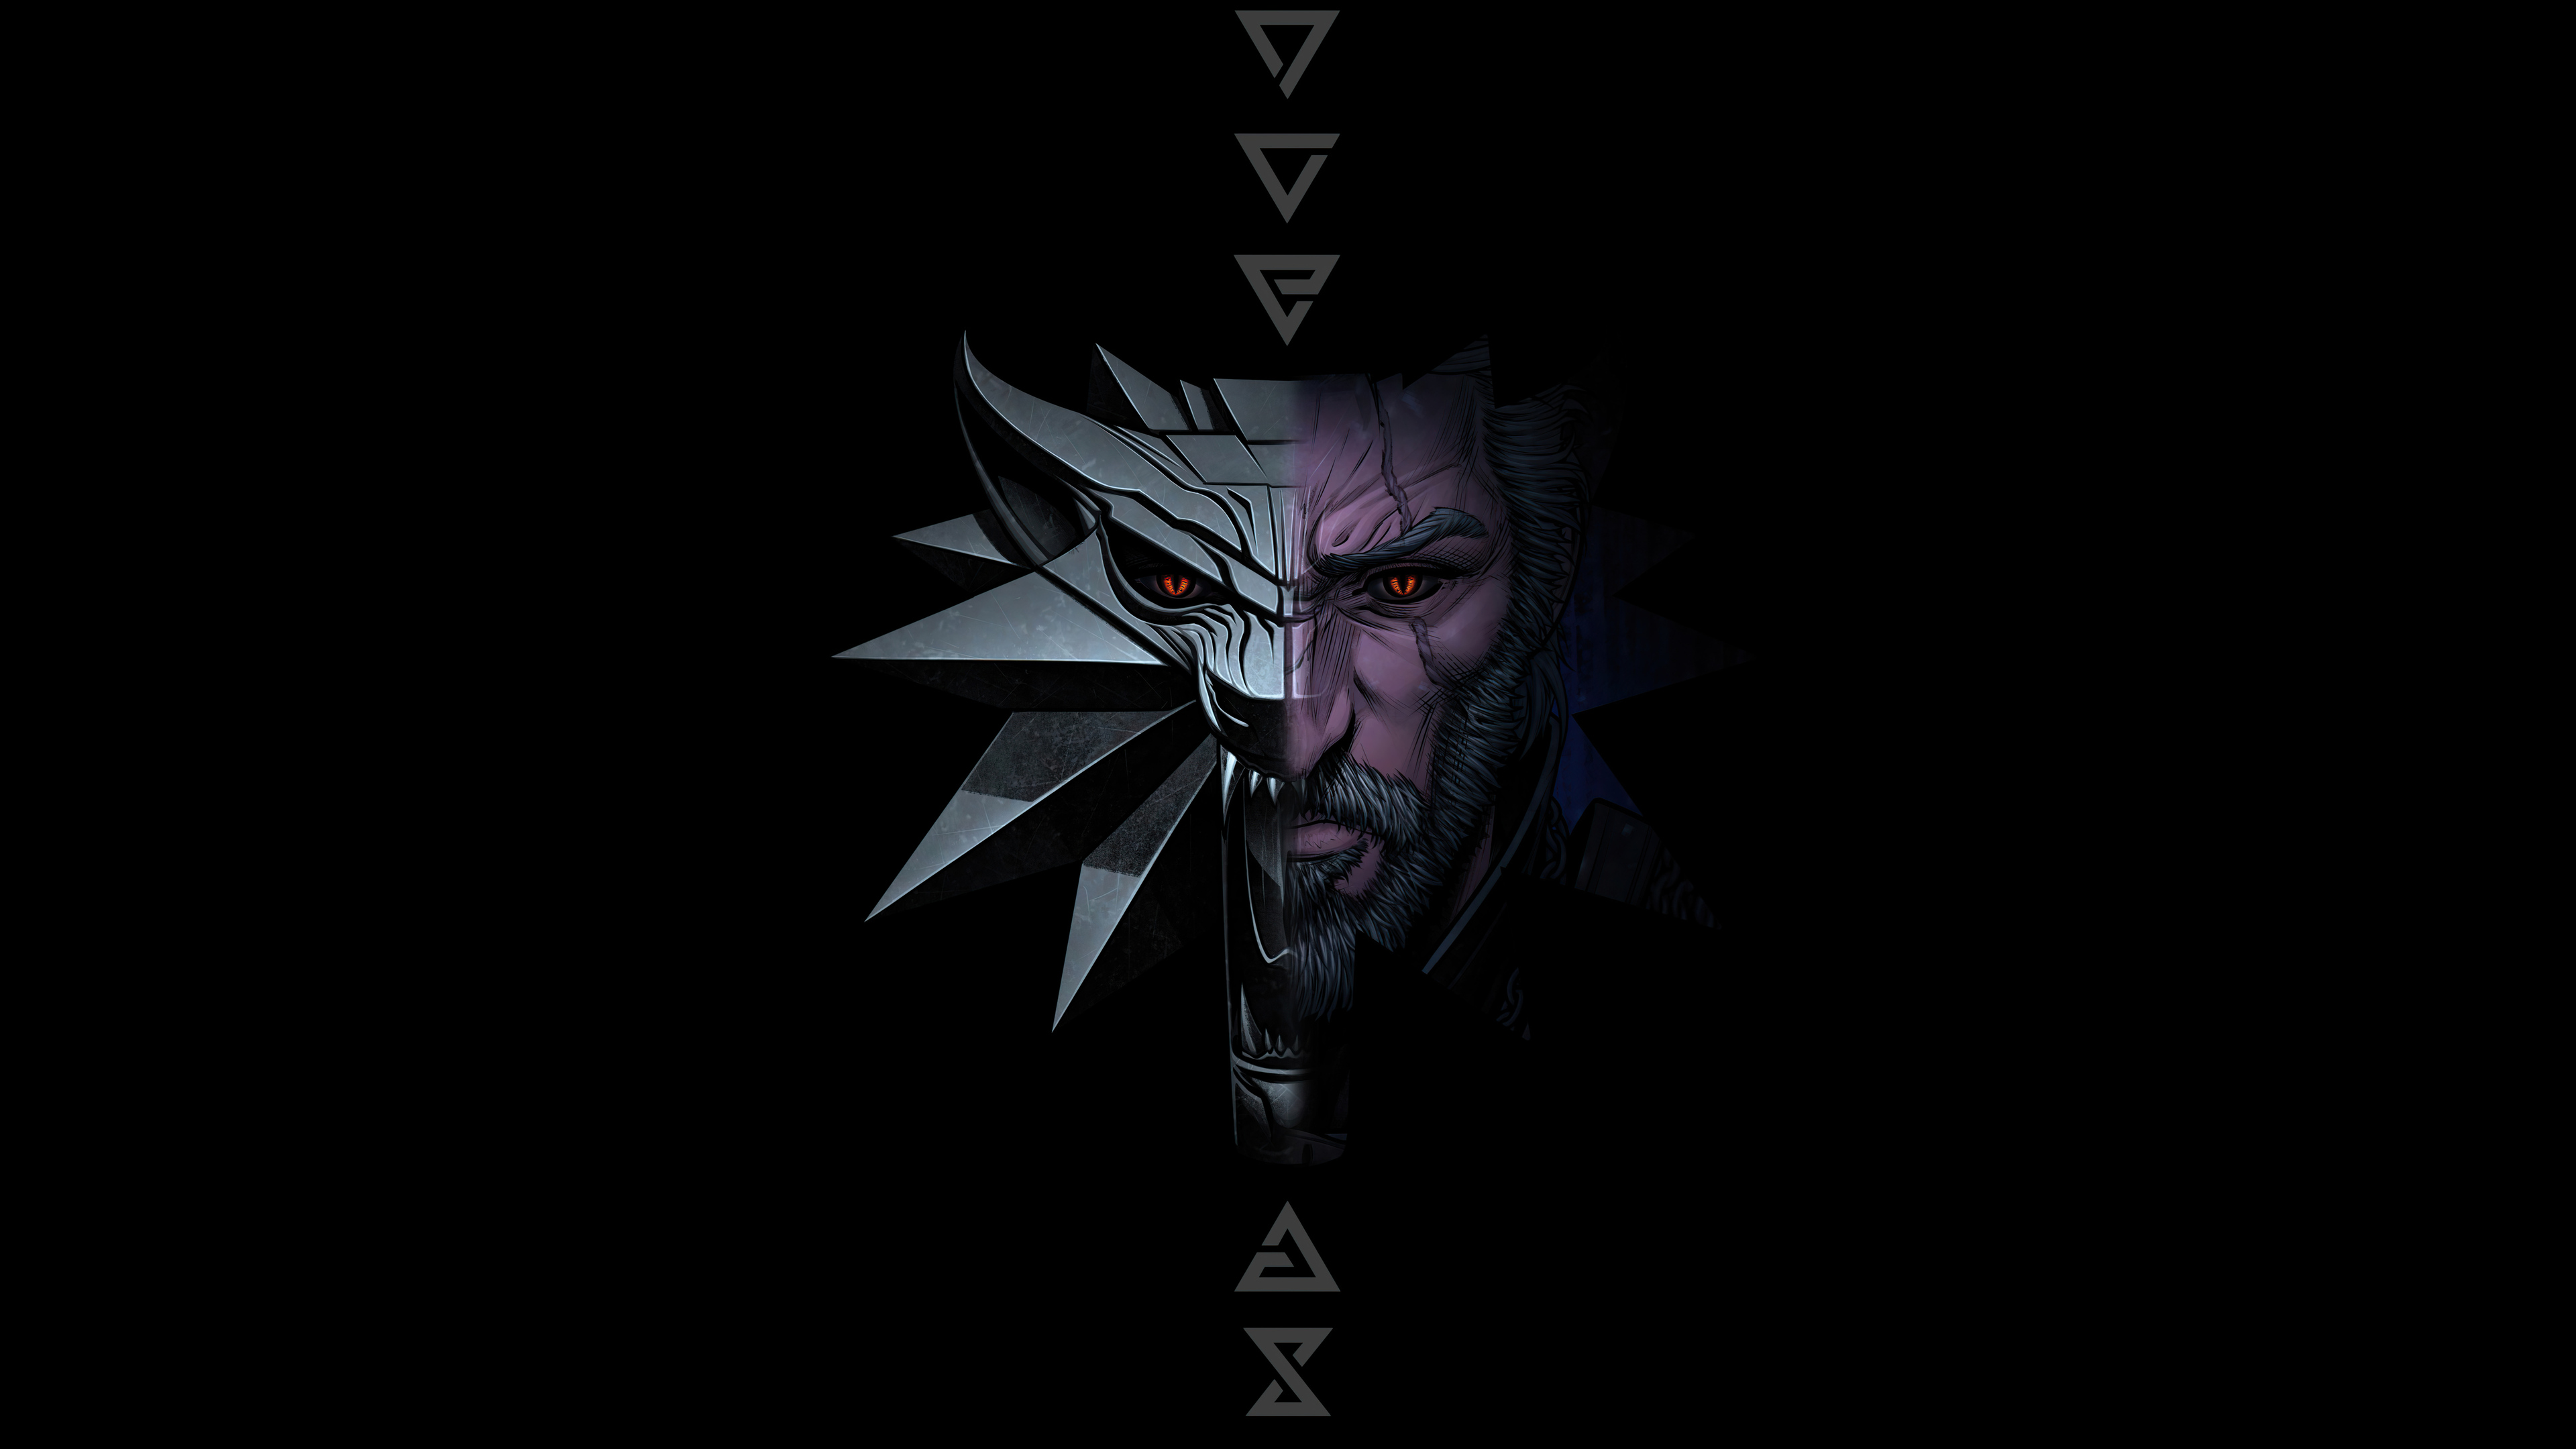 The Witcher Wallpapers on WallpaperDog